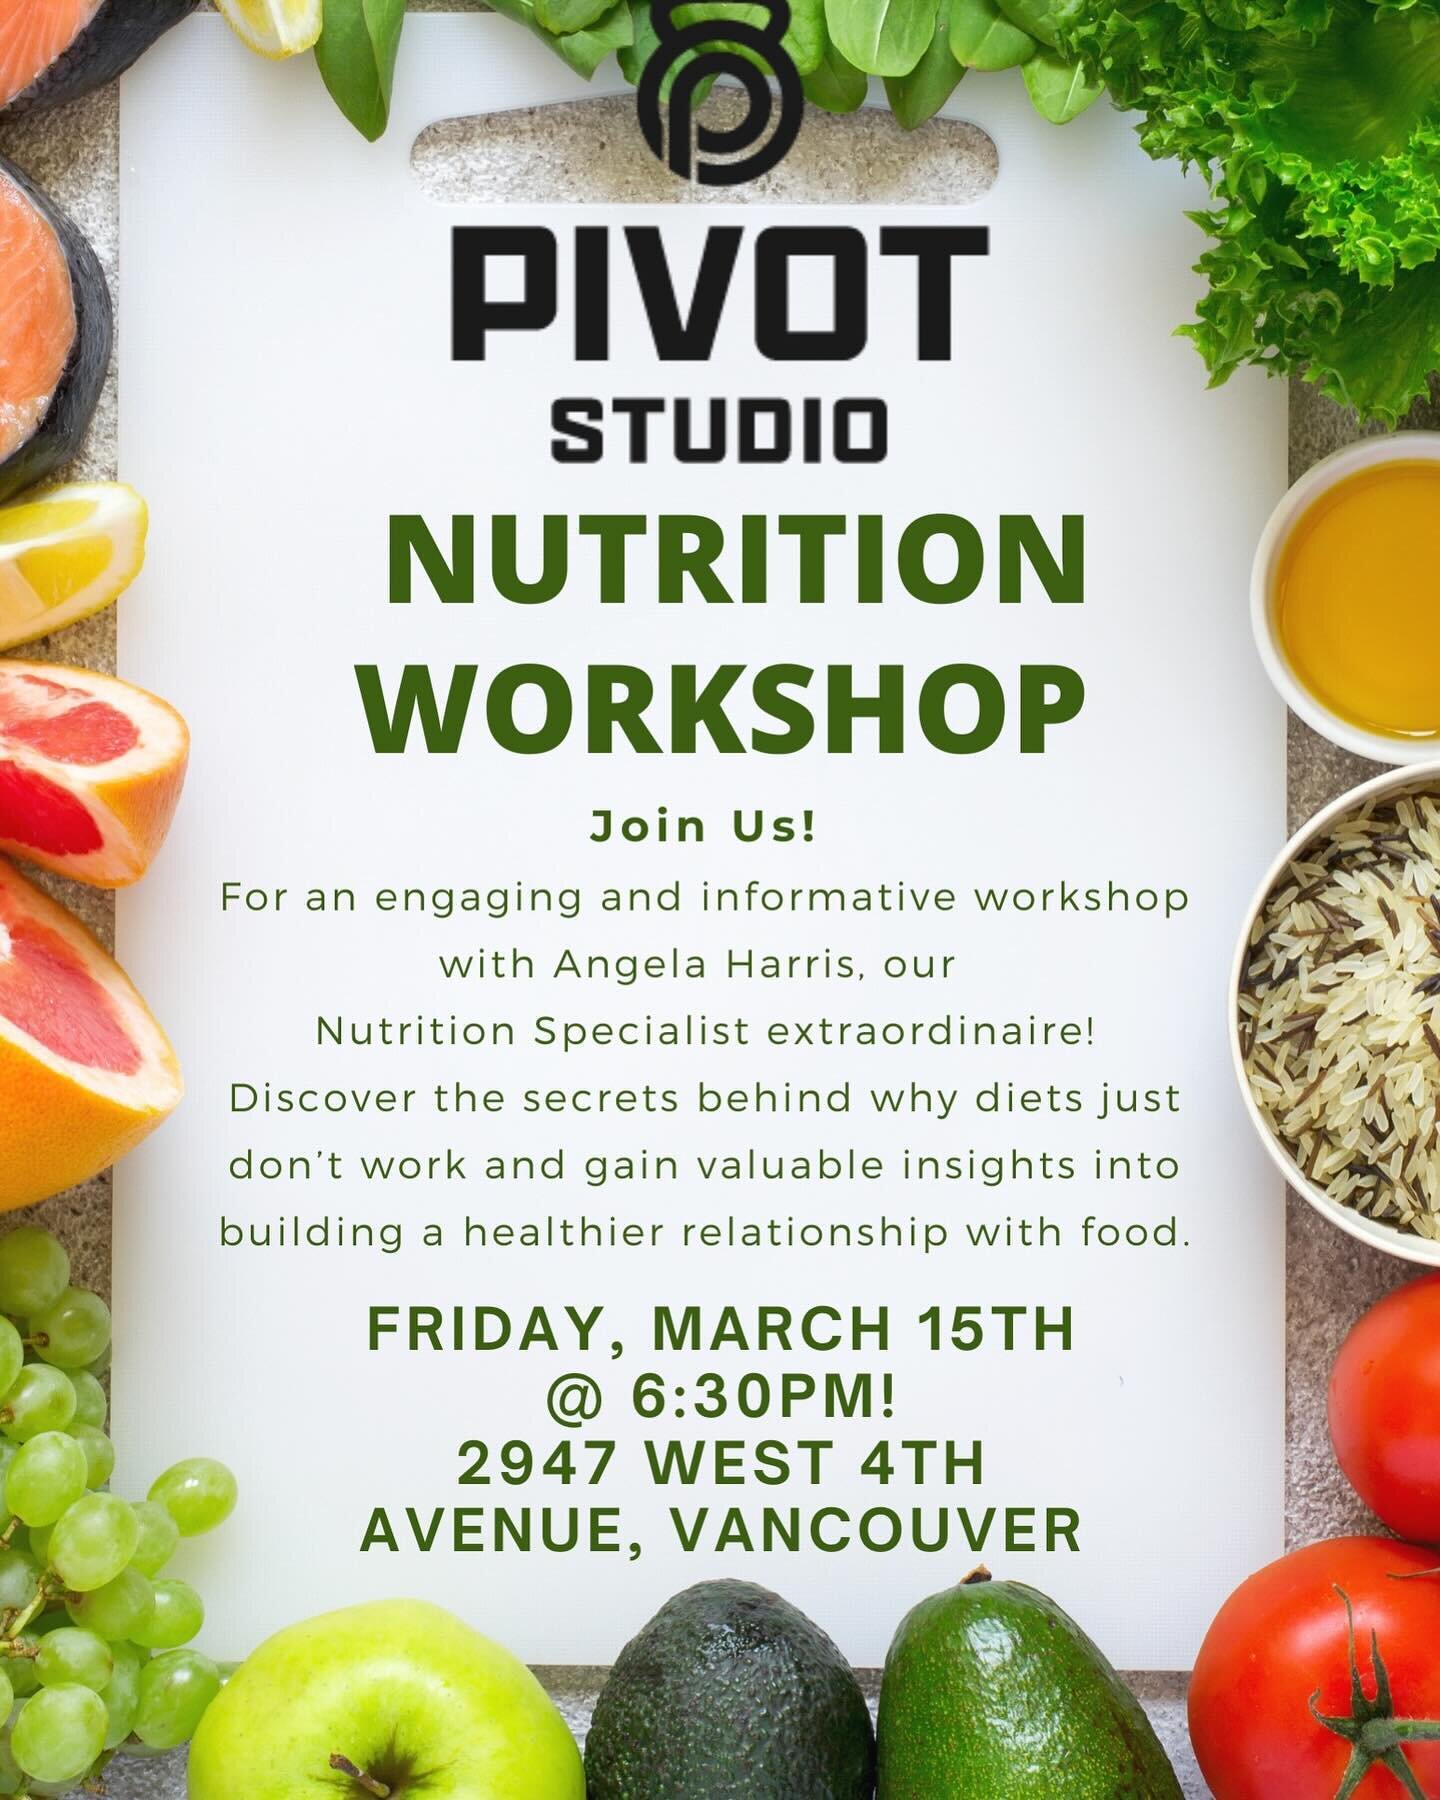 Our first Pivot Gathering&hellip;Friday Mar 15.  6:30pm. Healthy snacks,  Pivot Mocktail, a talk about health, a chance to gather and be with the community.  Angela will debunk diet myths and share practical tips for sustainable, long-term wellness. 